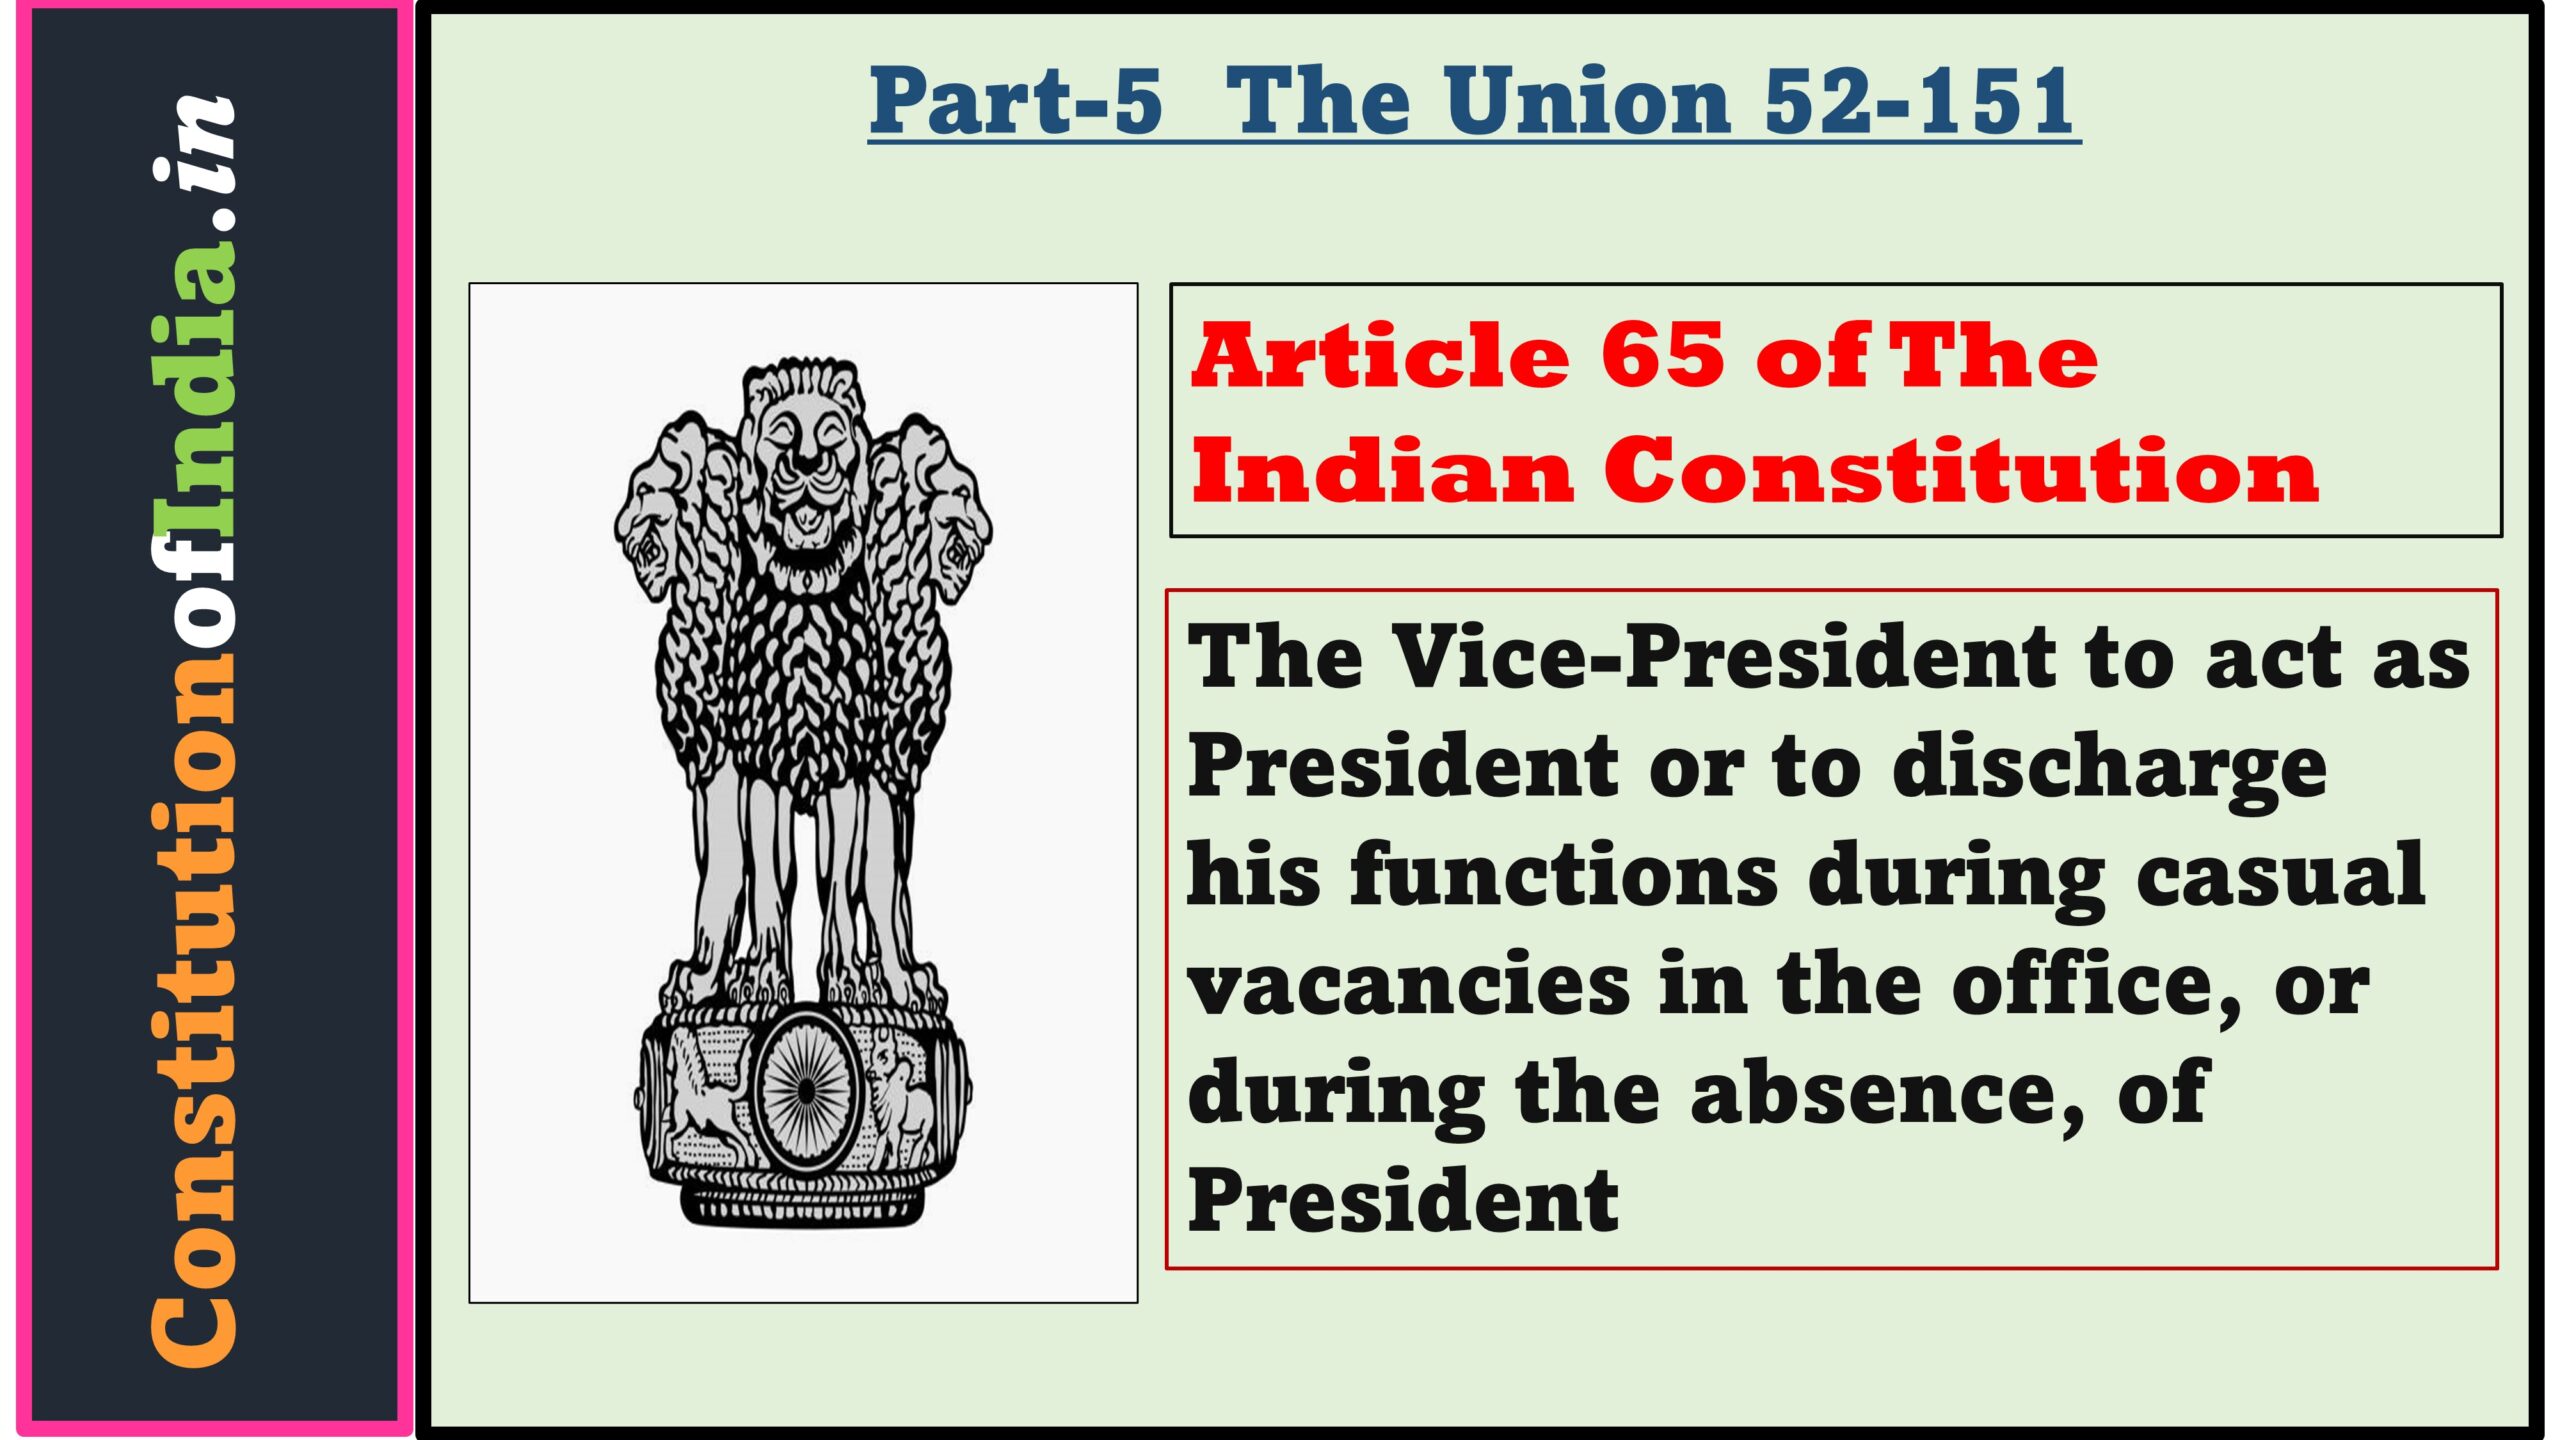 Article 65 of Indian Constitution